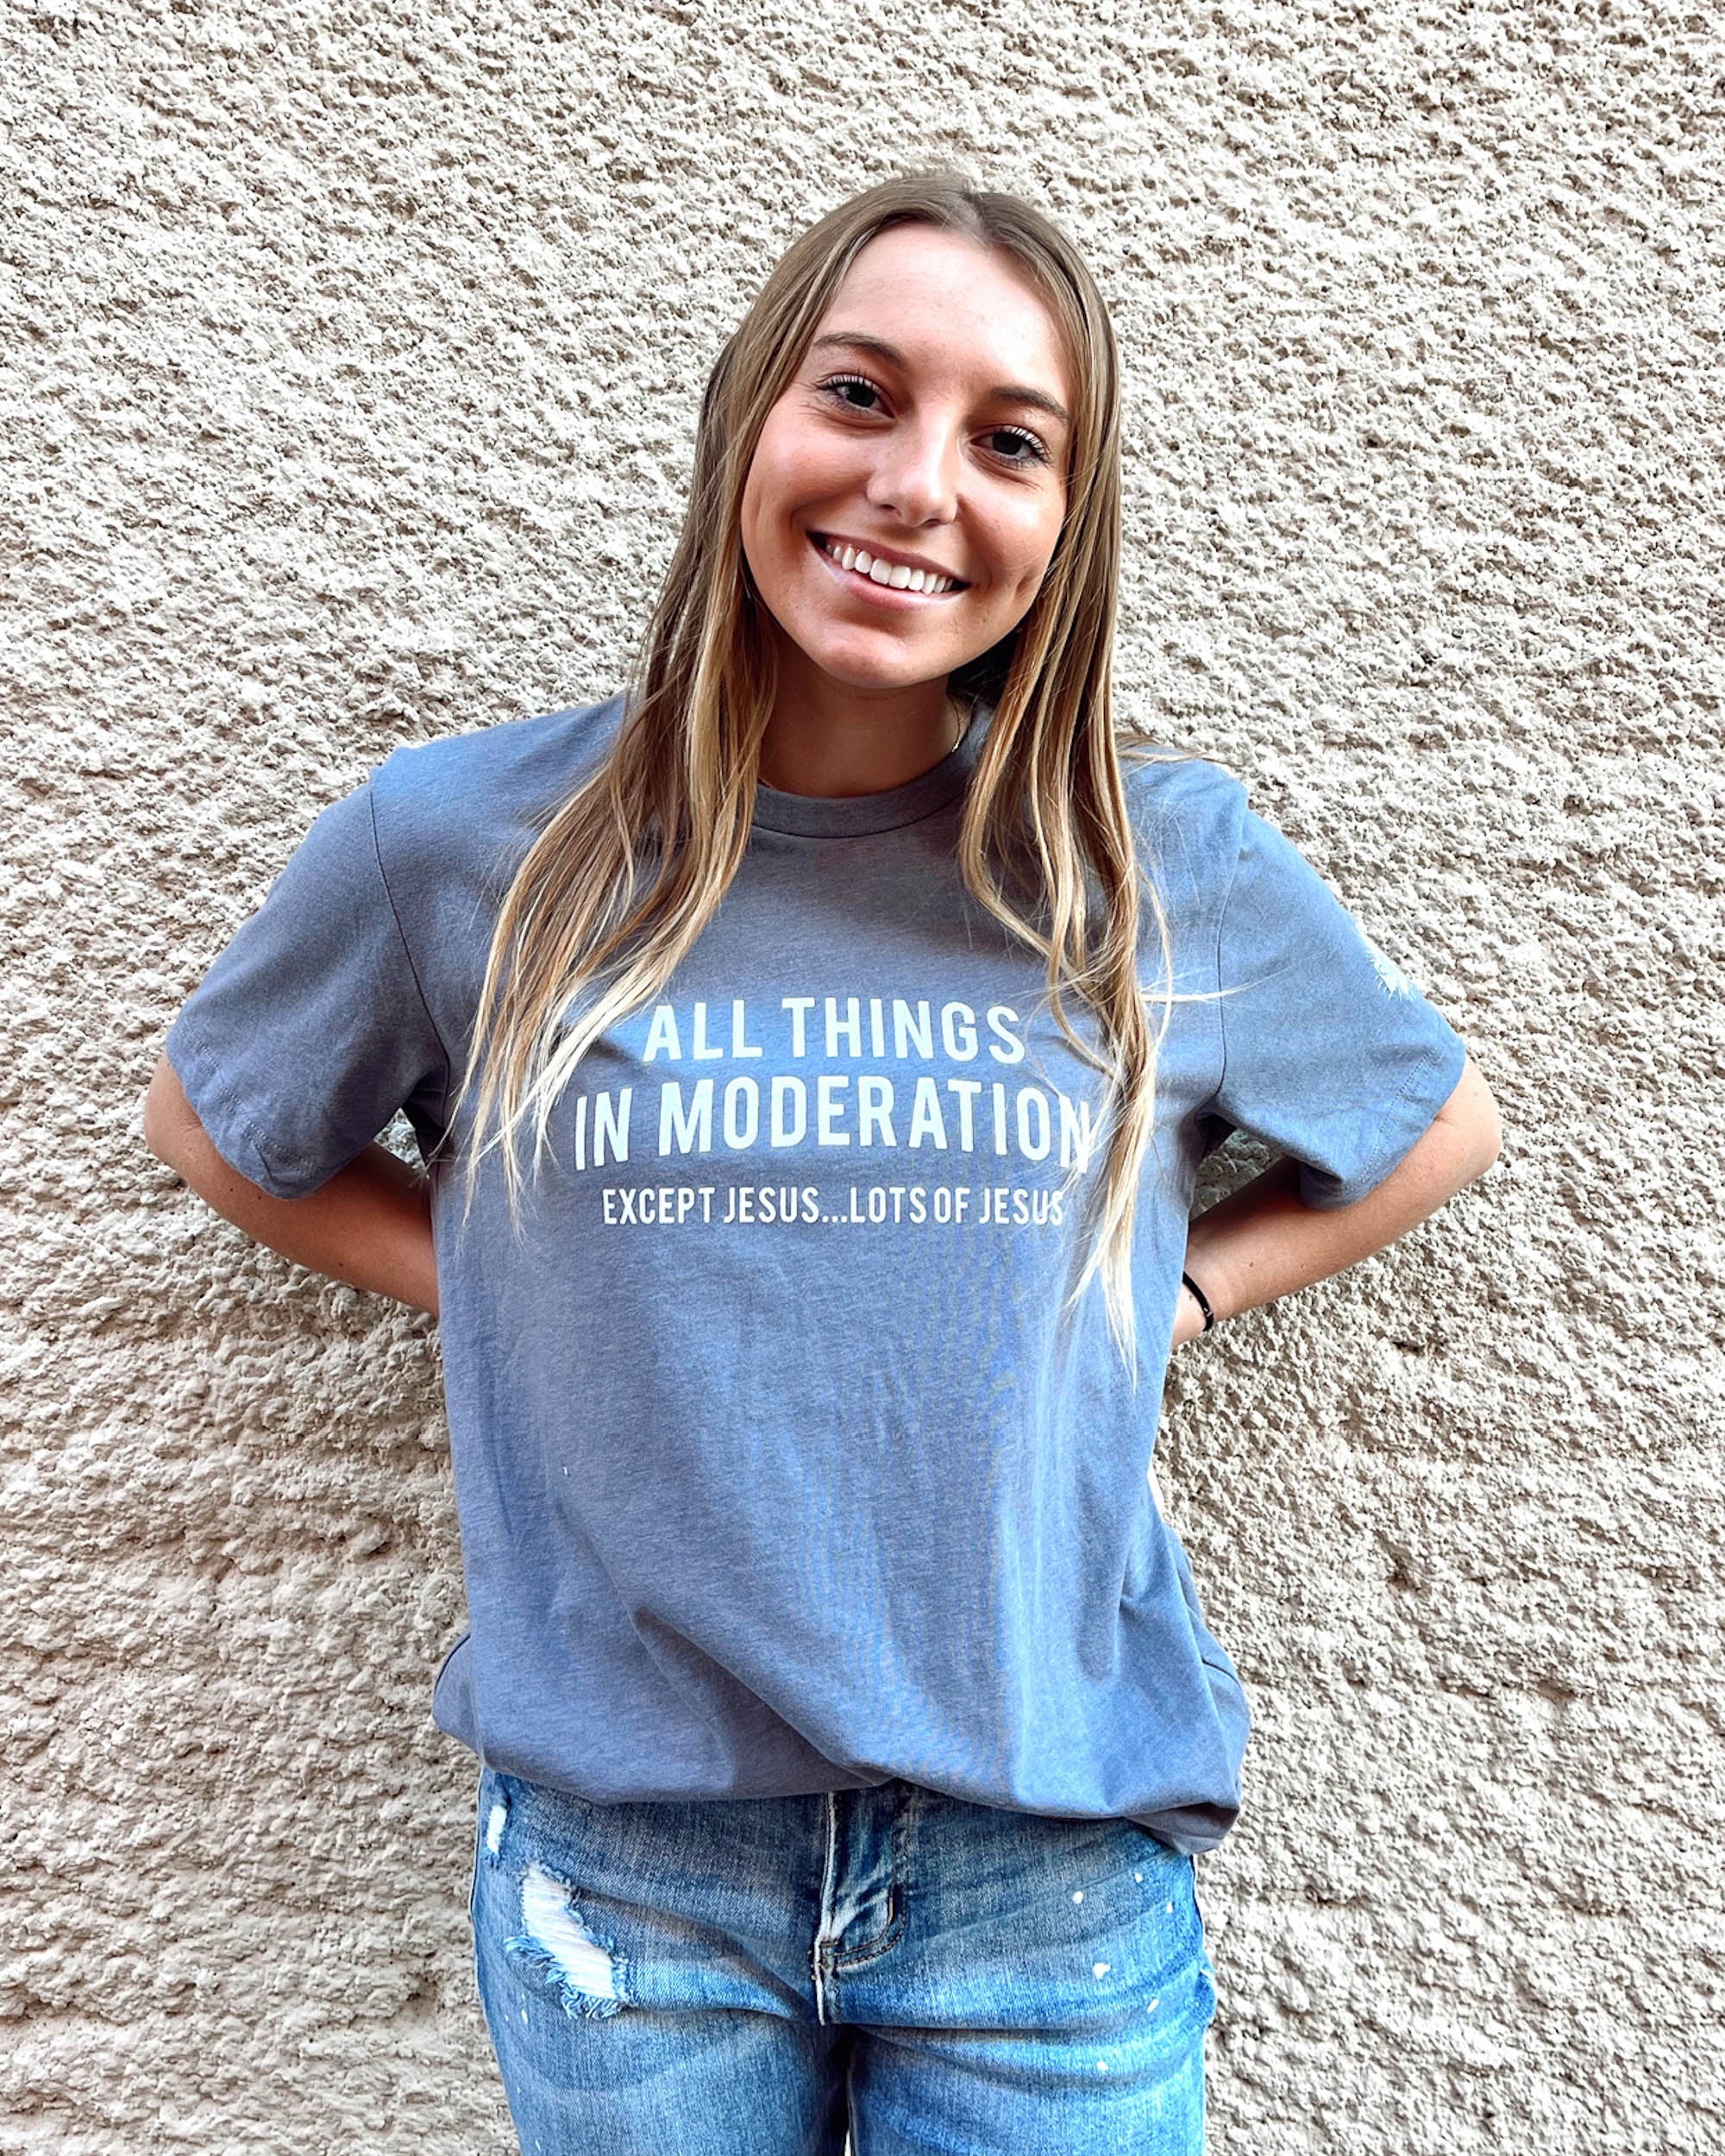 All Things in Moderation Storm T-shirt - Shopbluemoonbentonville